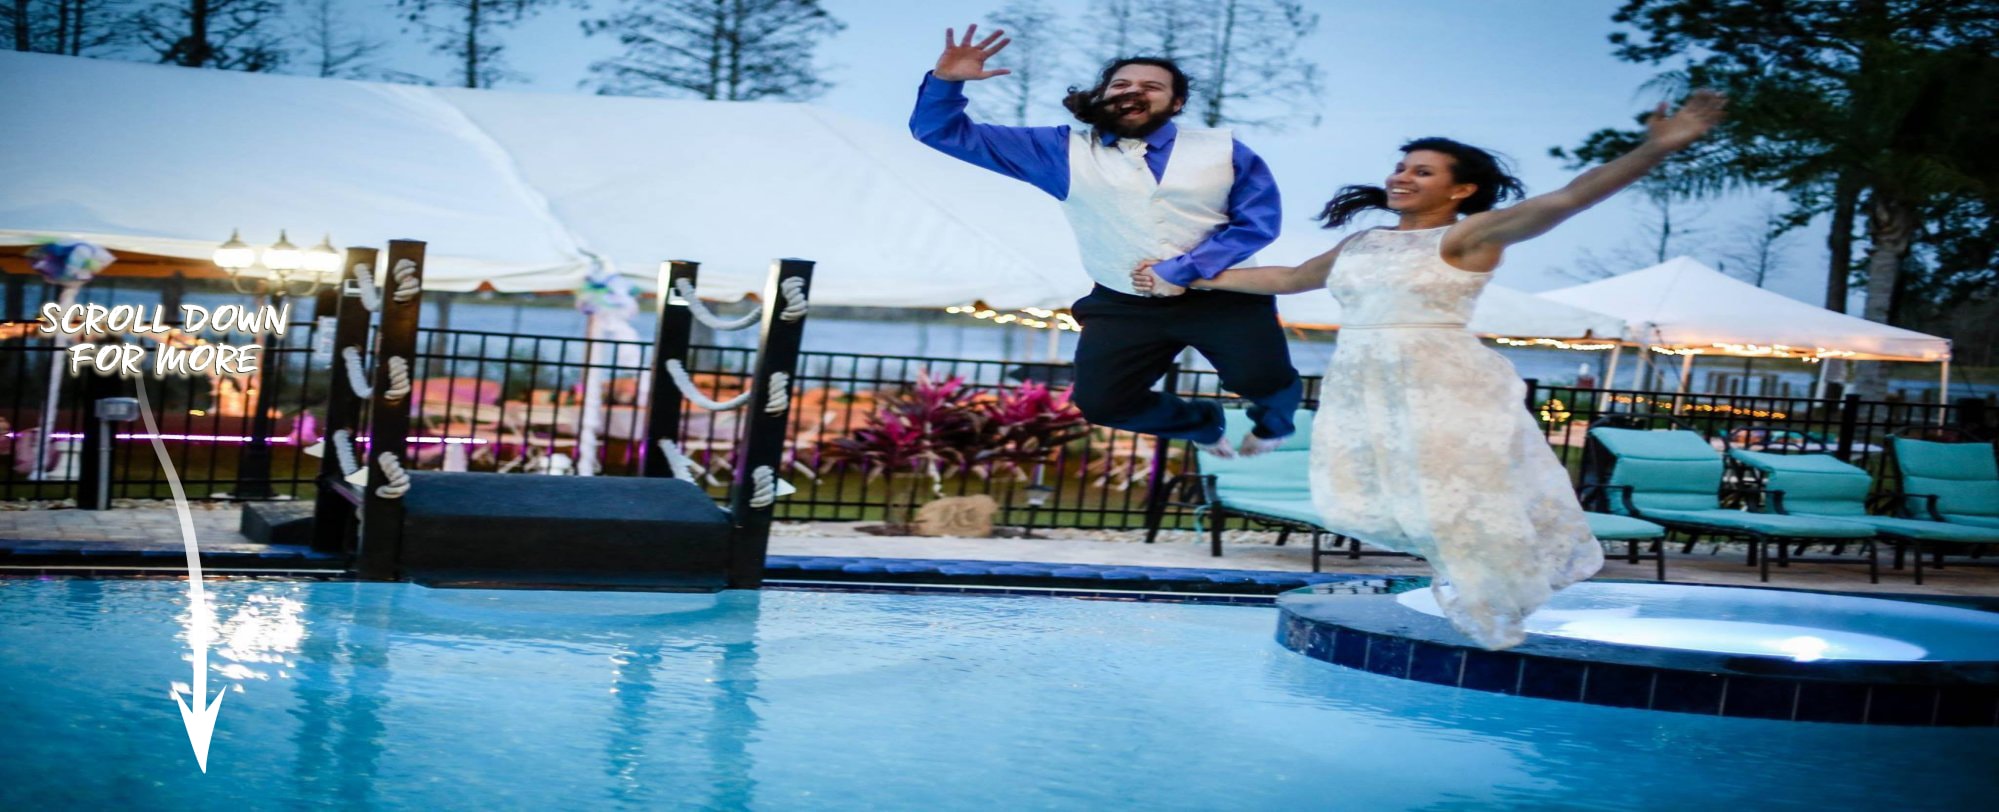 Take the plunge! Have your wedding at The Great Escape Lakeside home